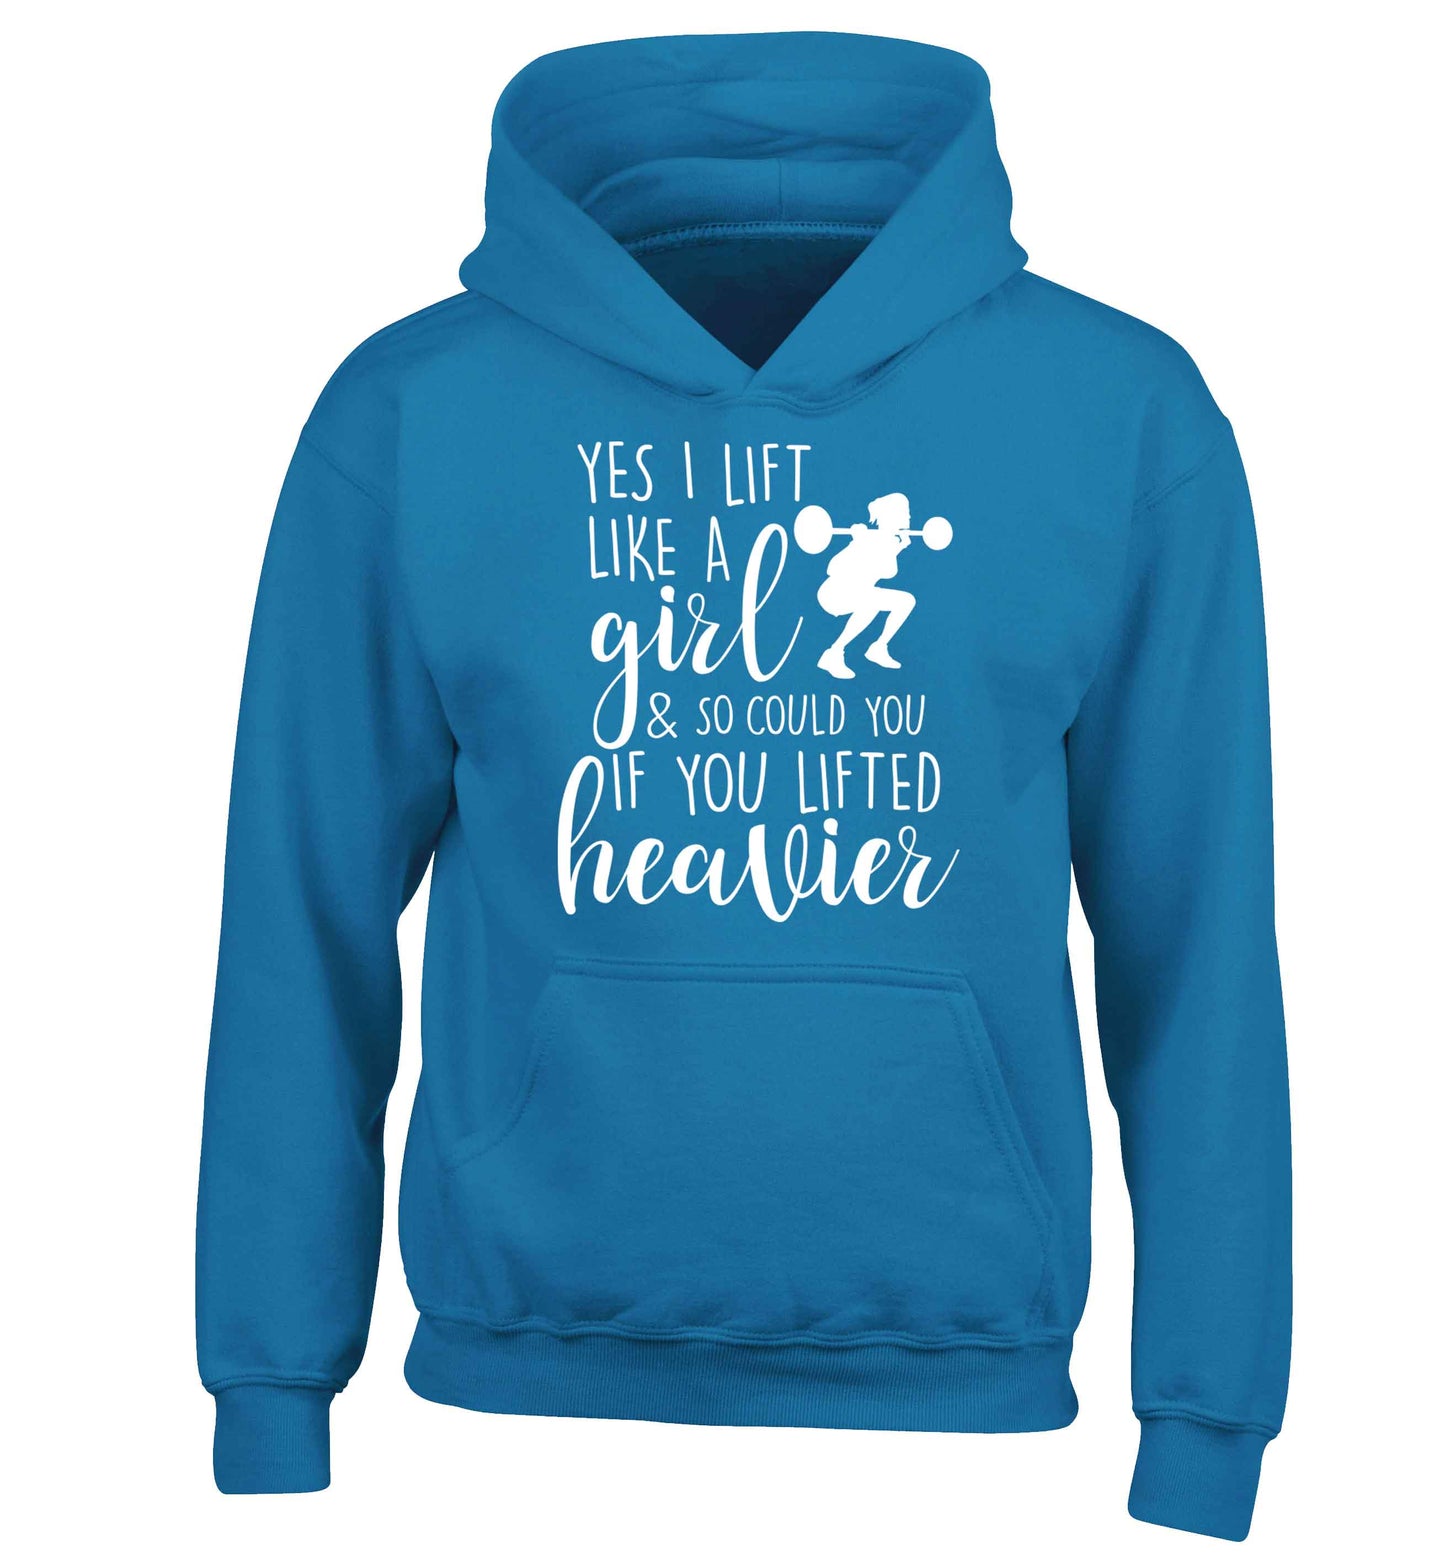 Yes I lift like a girl and so could you if you lifted heavier children's blue hoodie 12-13 Years